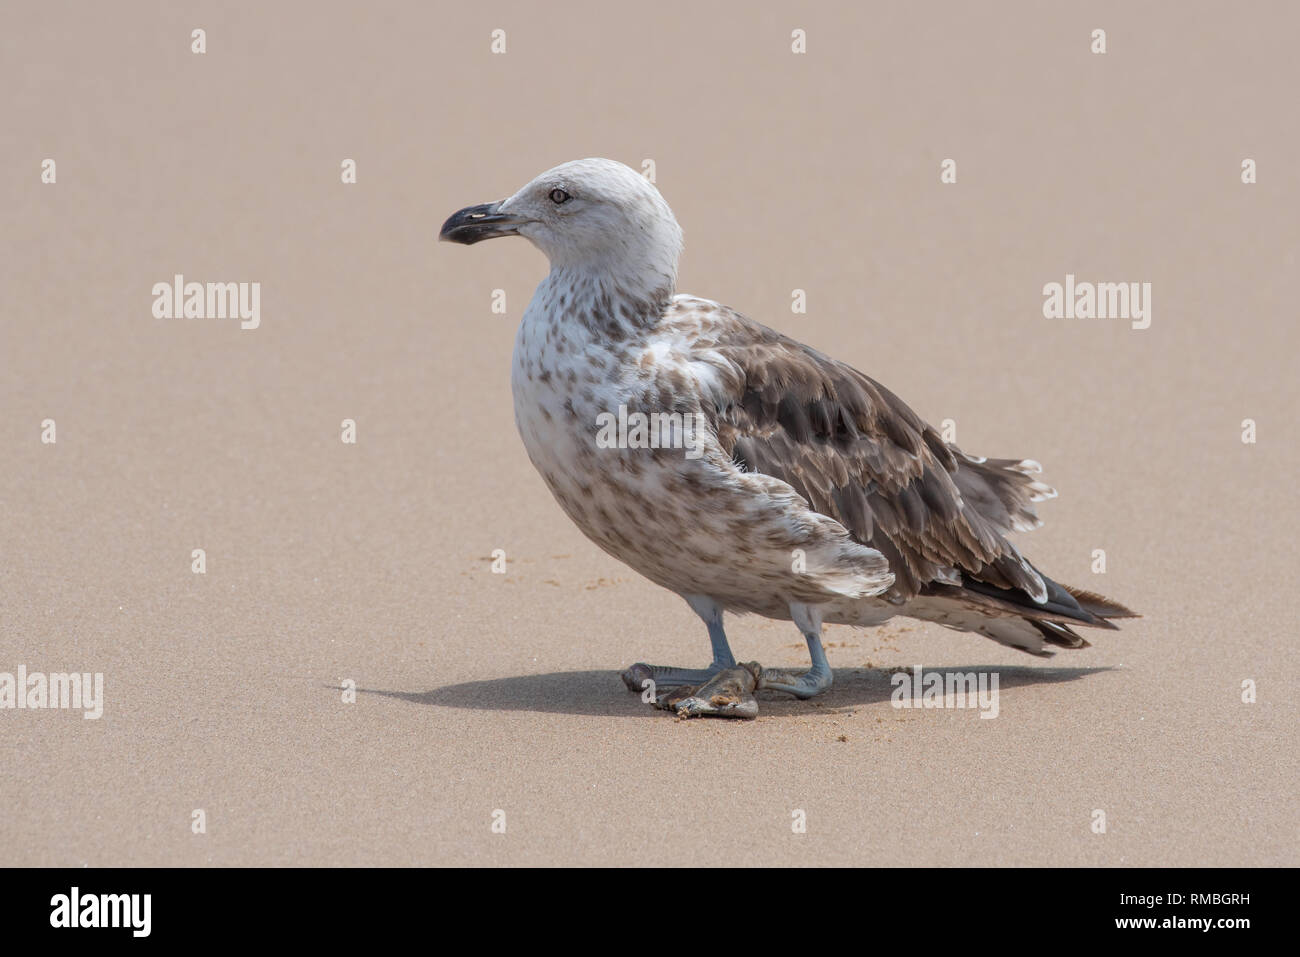 Pollution and human waste products take their toll on wild animals. Pictured is a juvenile kelp gull which has already lost one foot and is about to l Stock Photo